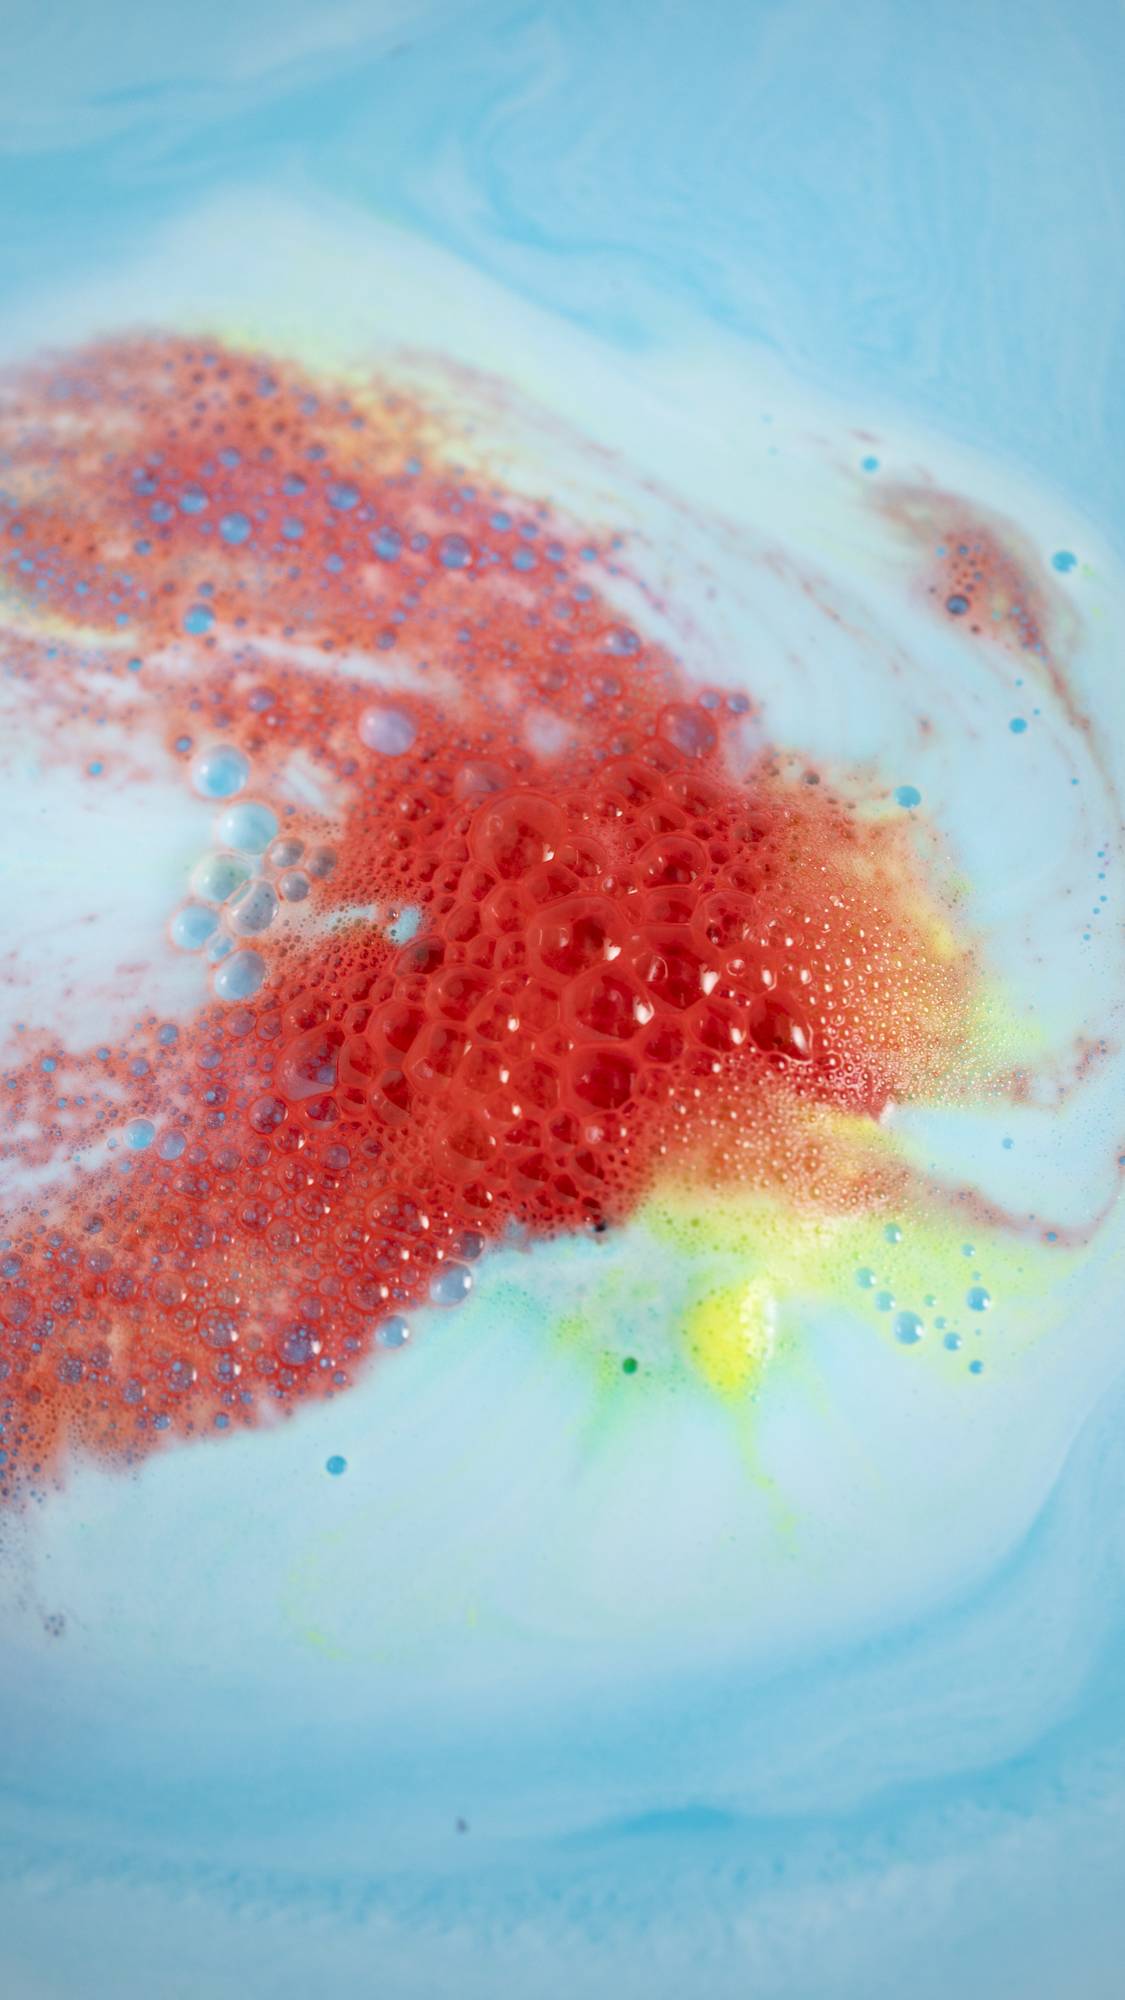 The Super Dad bath bomb is giving off bright fiery, red foamy swirls among the sea of blue.